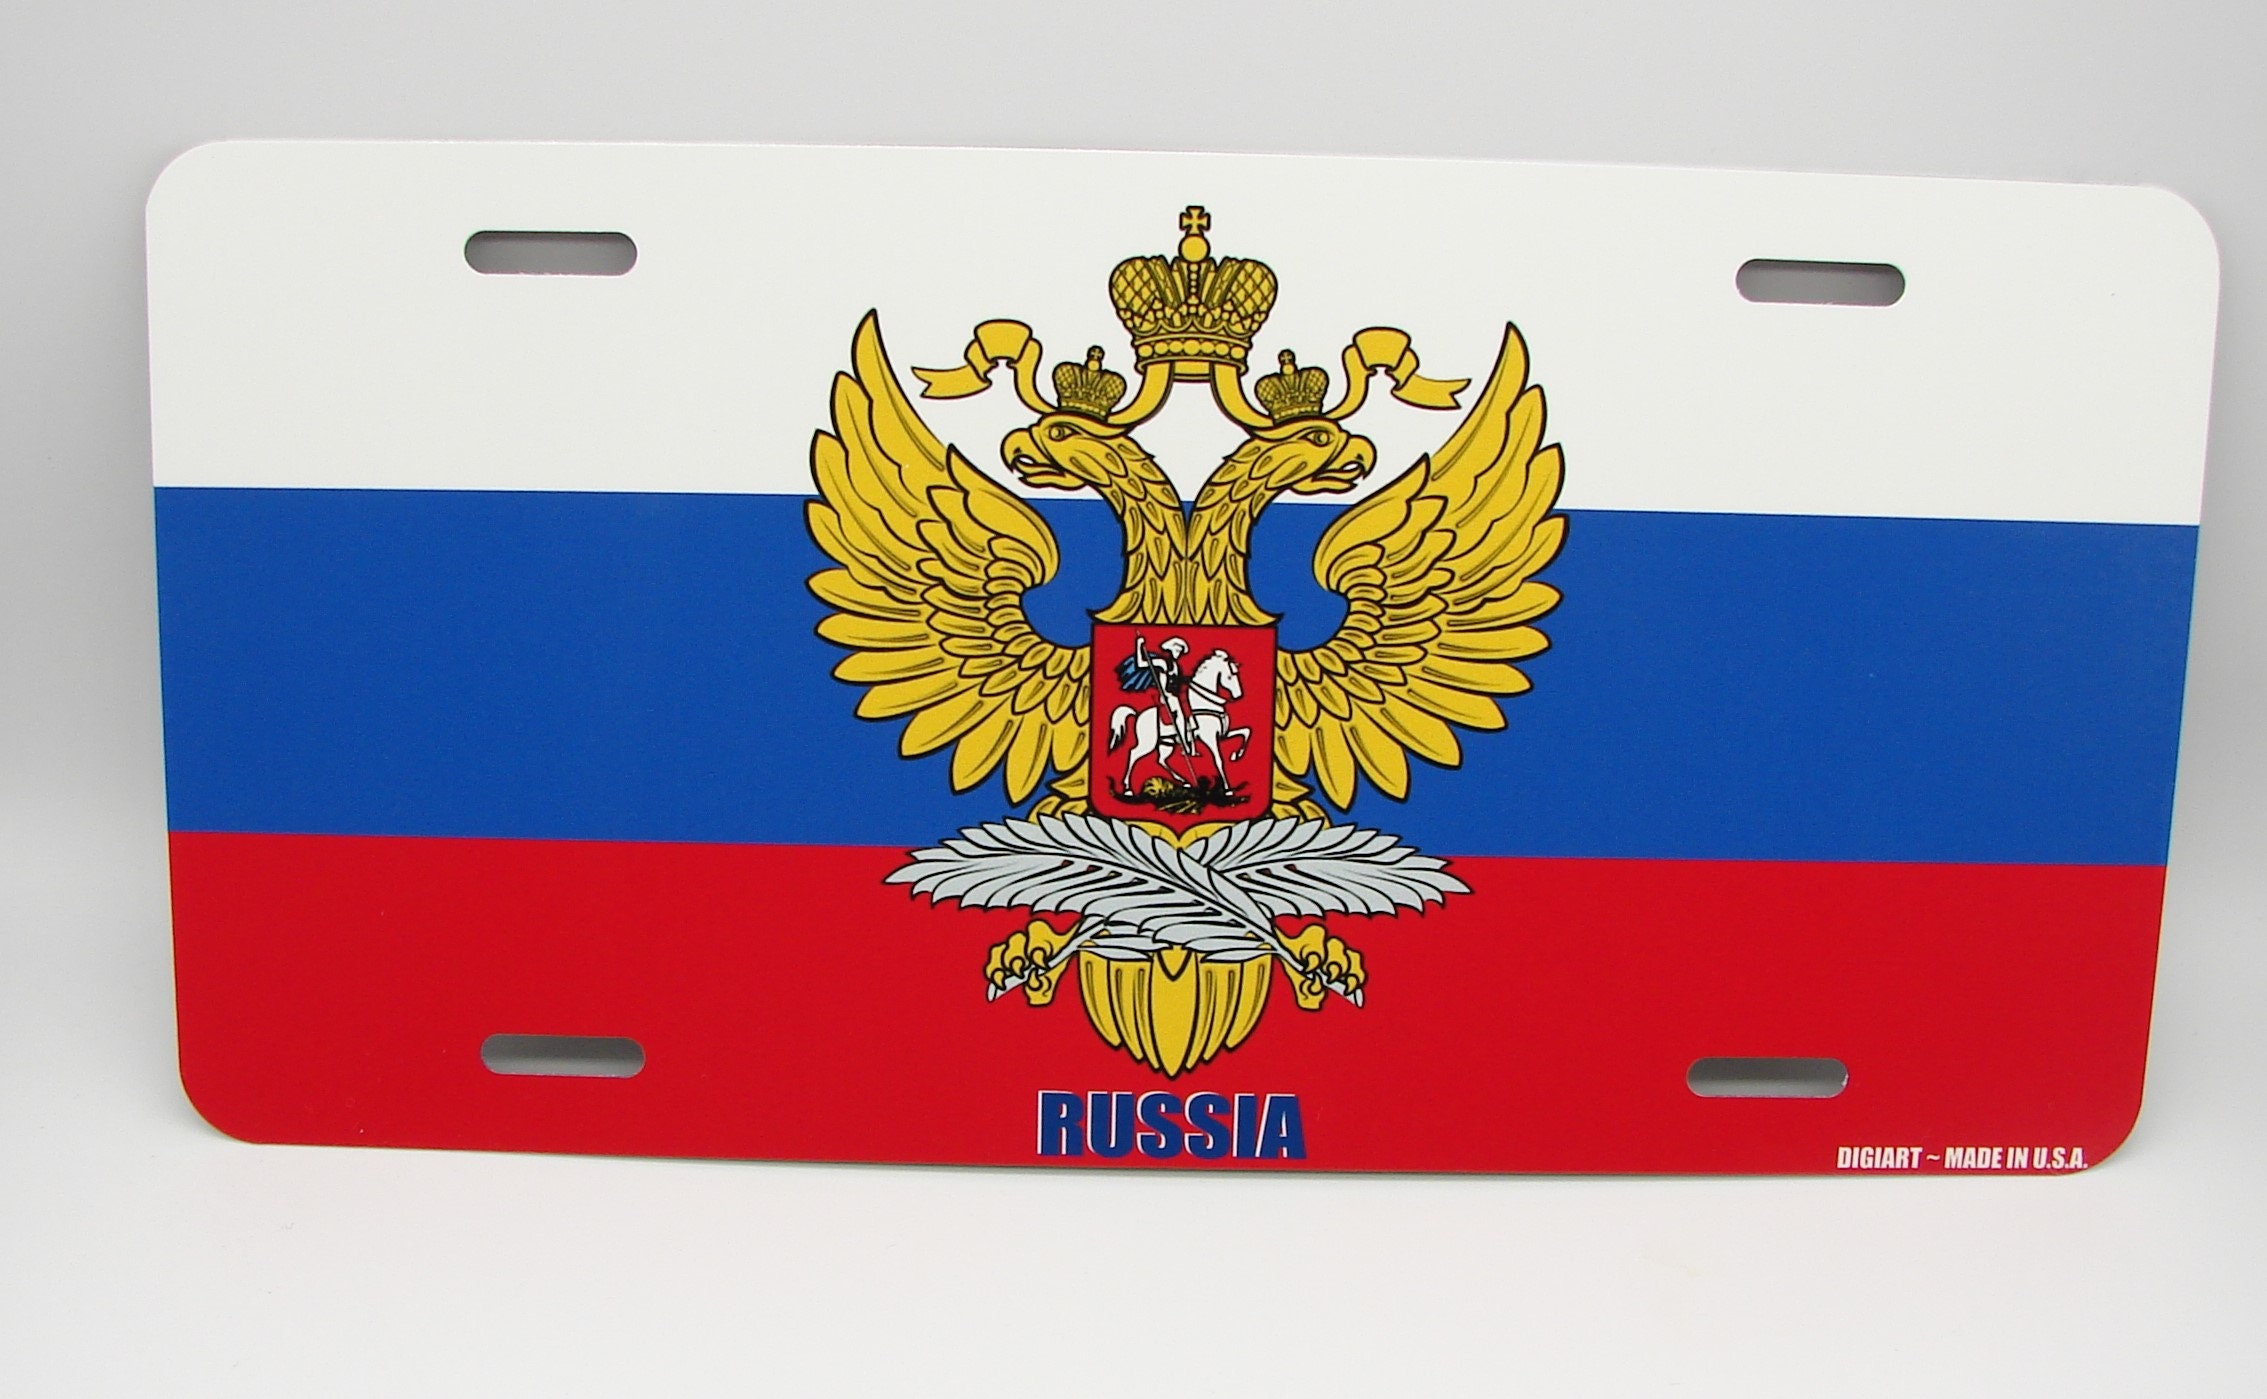 RUSSIA FLAG Custom License Plate With Coat of Arms of the Russian  Federation